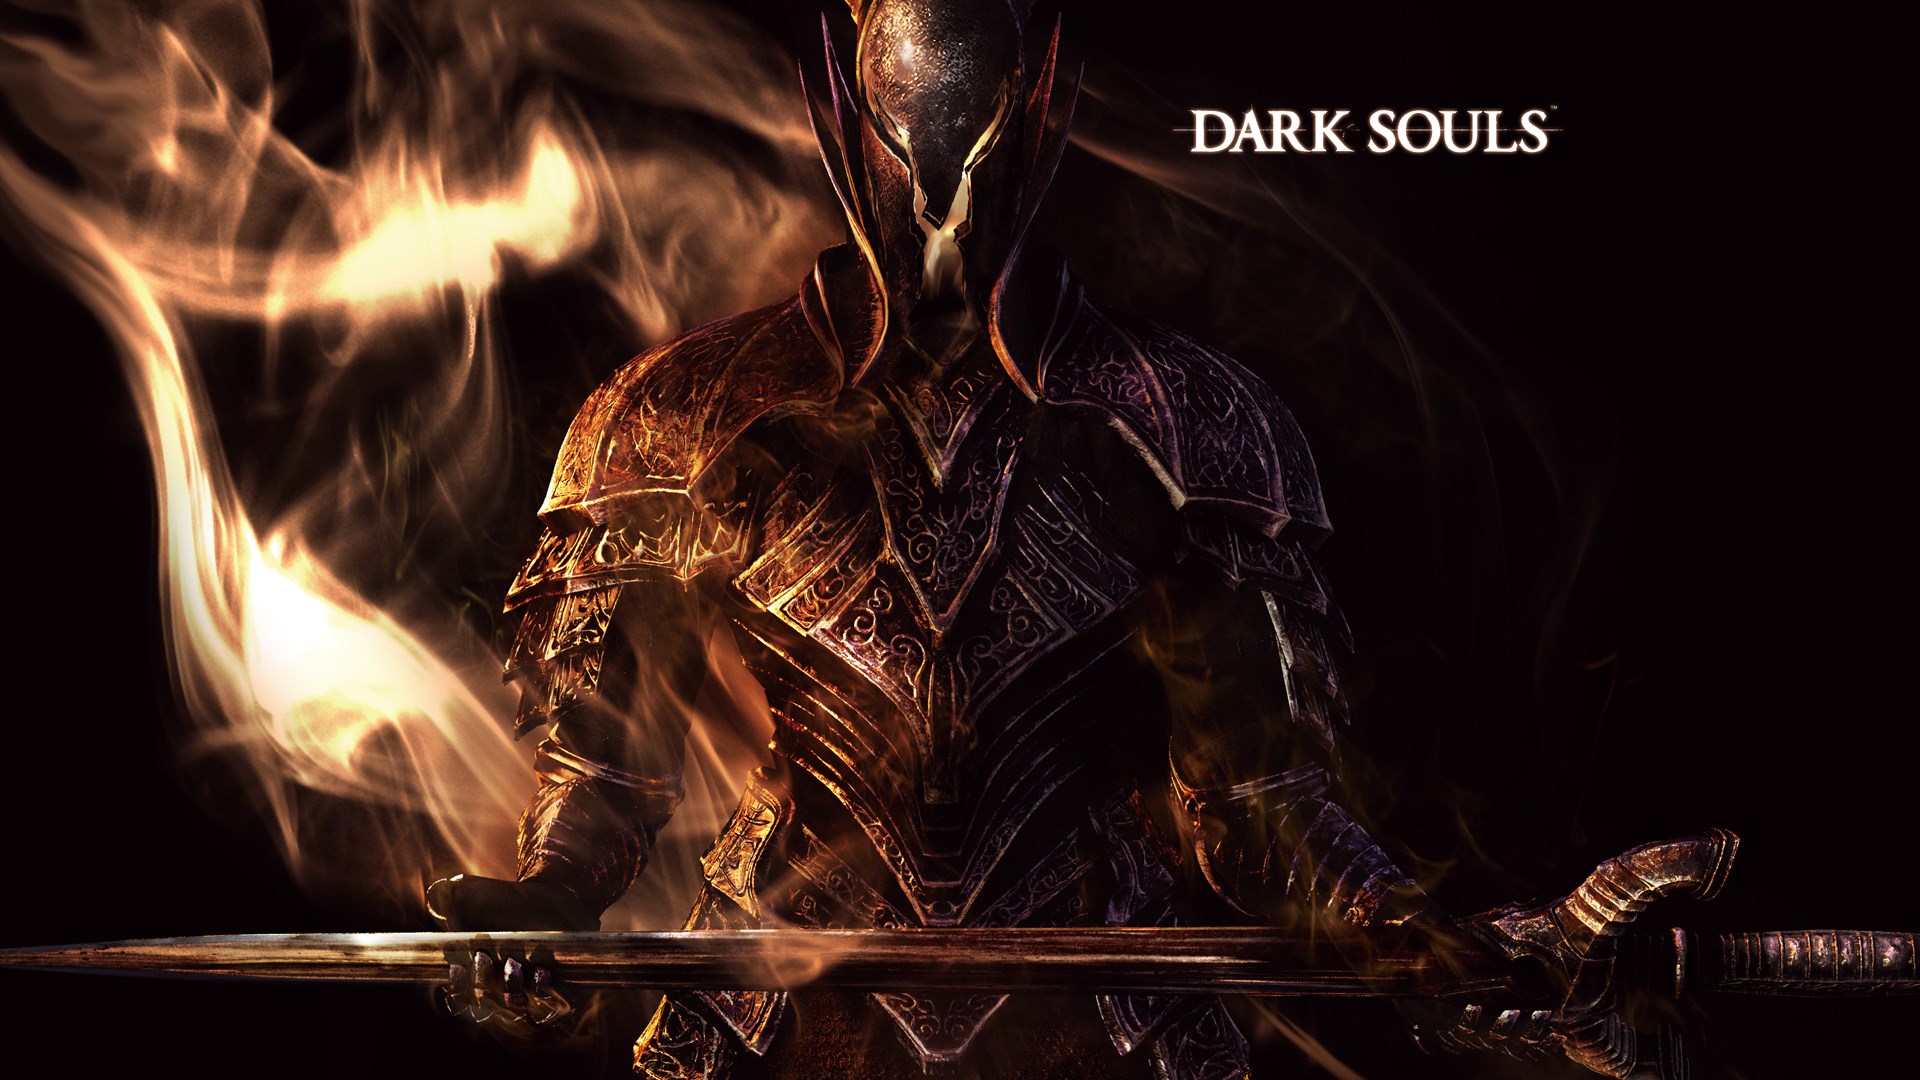 Ranking the Dark Souls games - from worst to best!